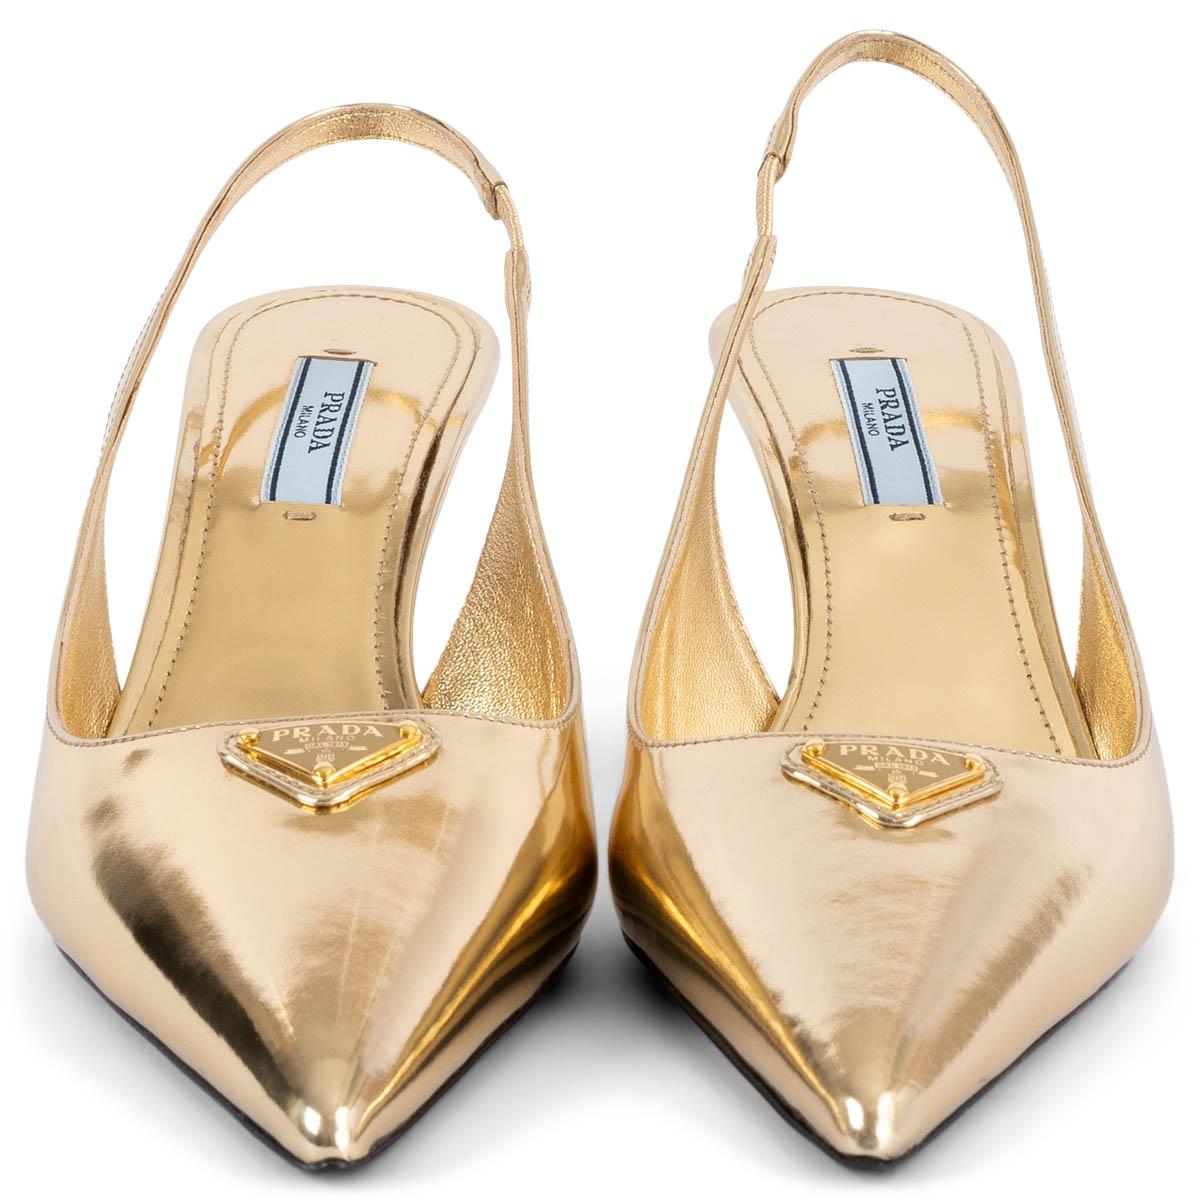 100% authentic Prada pointed-toe slingbacks in gold-tone metallic leather with logo plaque. Brand new.

Measurements
Imprinted Size	37
Shoe Size	37
Inside Sole	24cm (9.4in)
Width	7.5cm (2.9in)
Heel	7cm (2.7in)
Hardware	Gold-Tone

All our listings